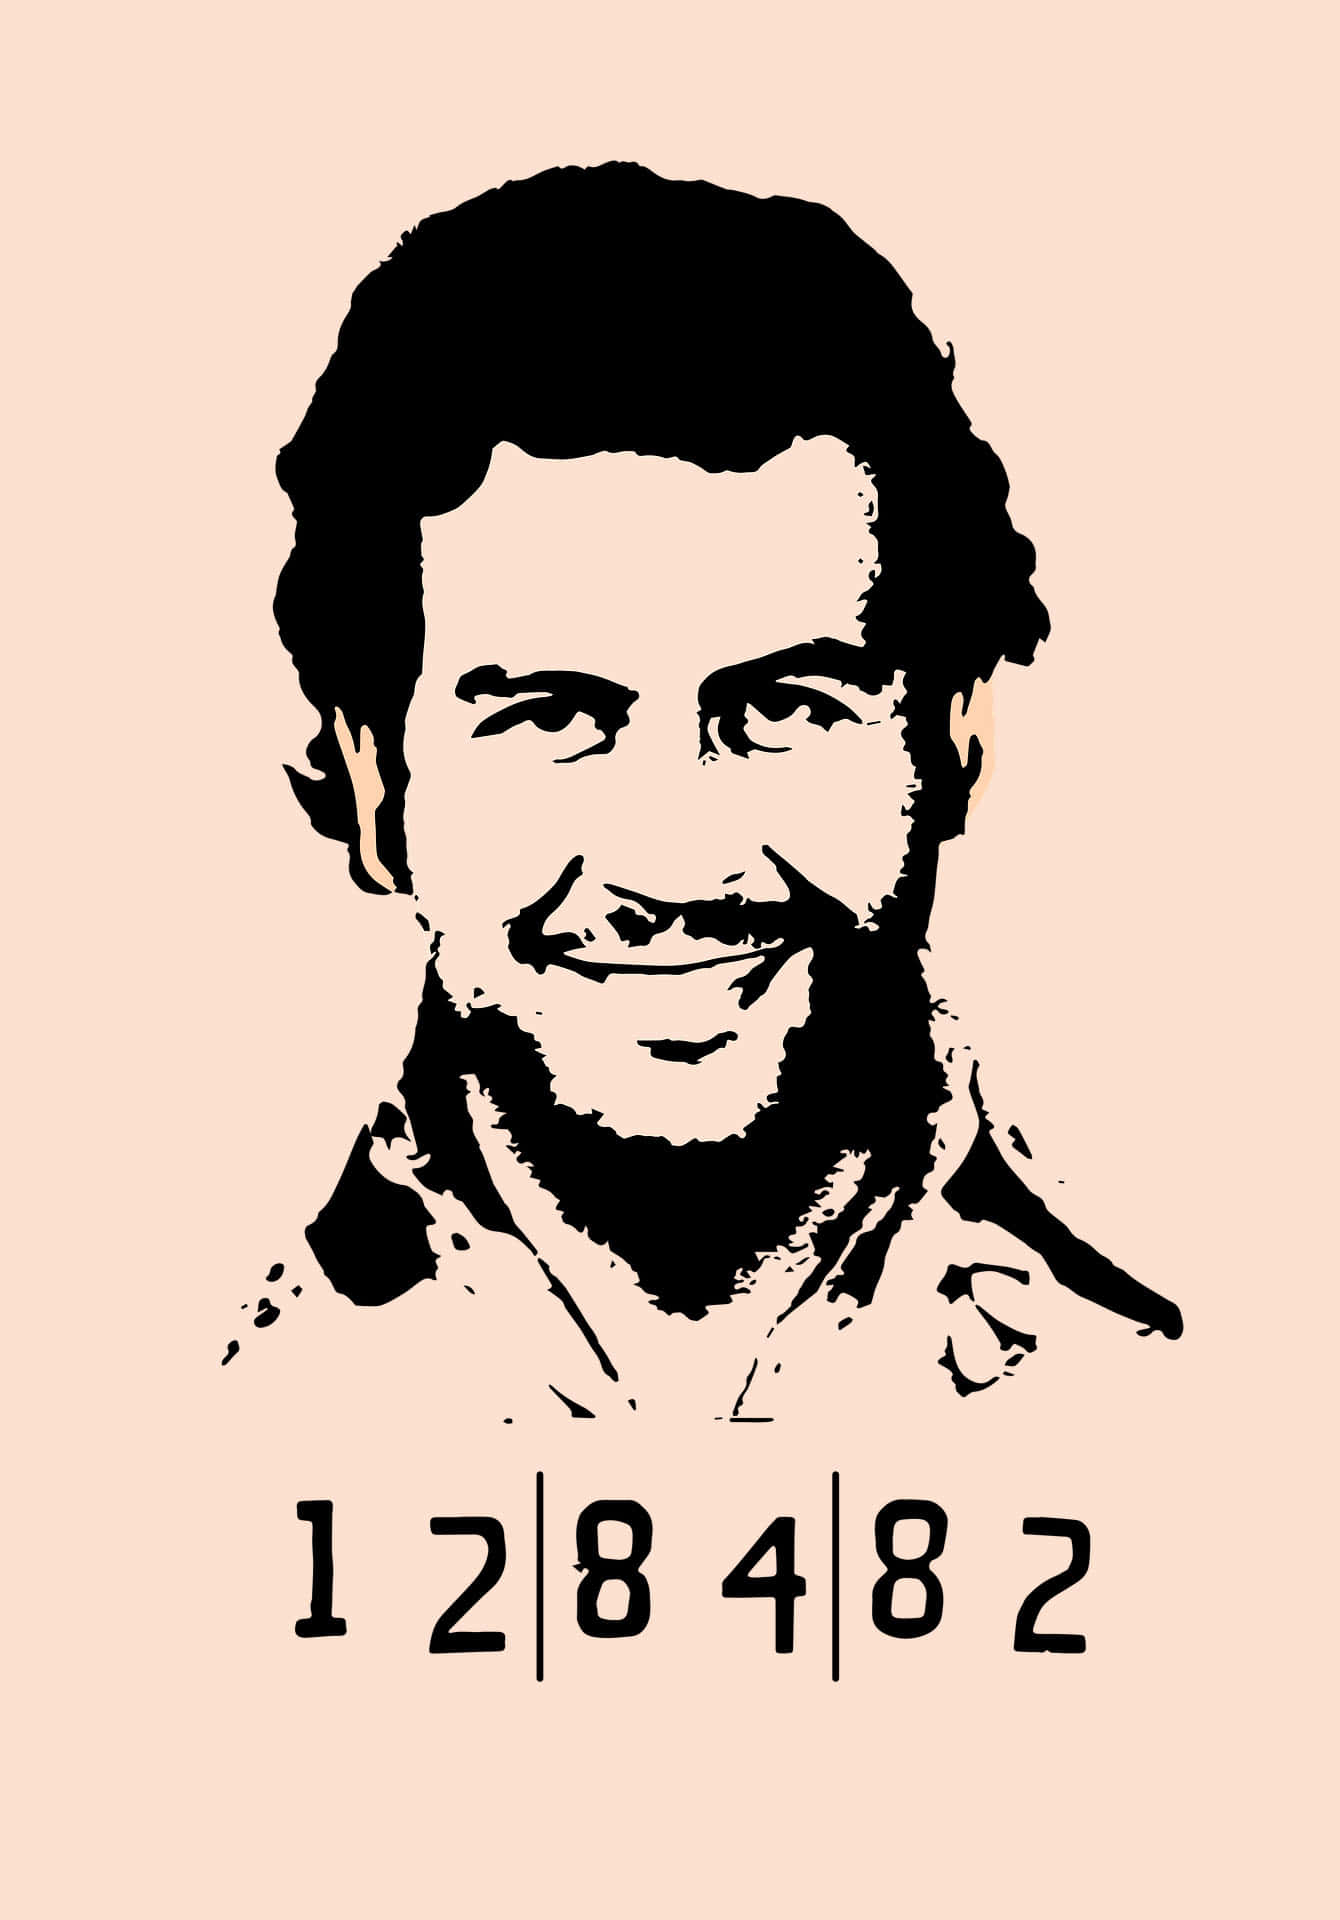 A Drawing Of A Man With The Number 828